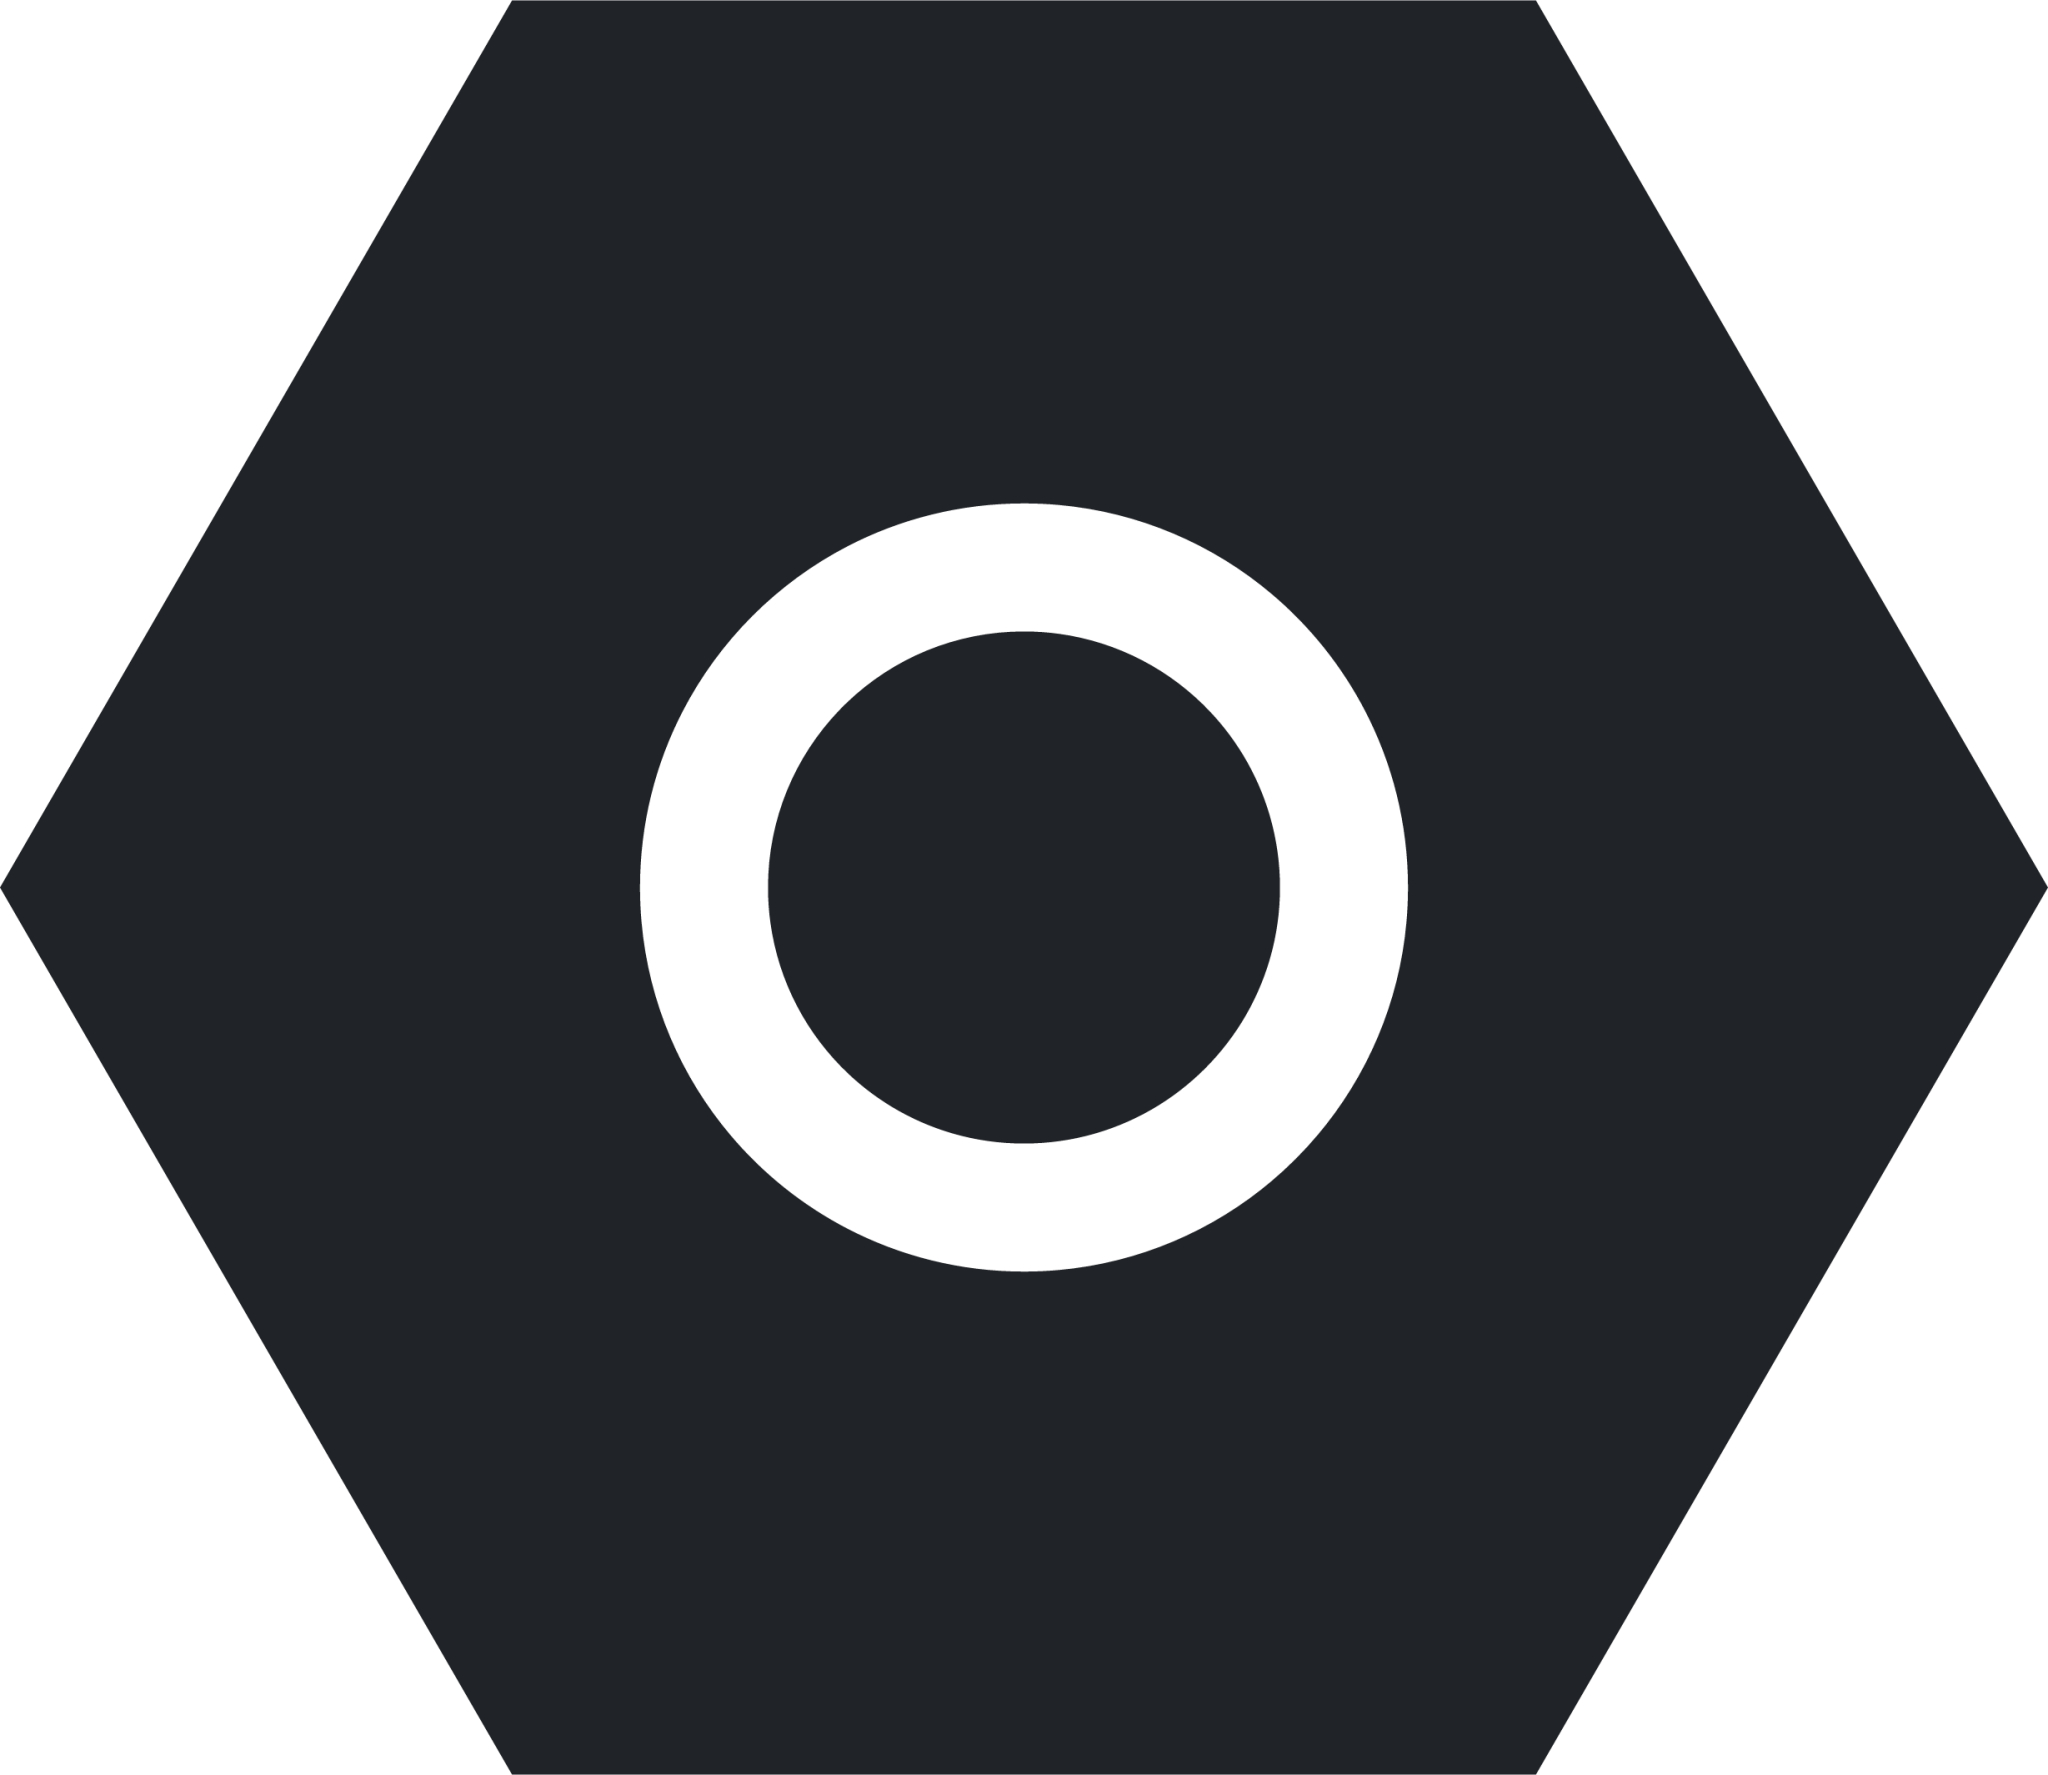 site (sharp filled) icon